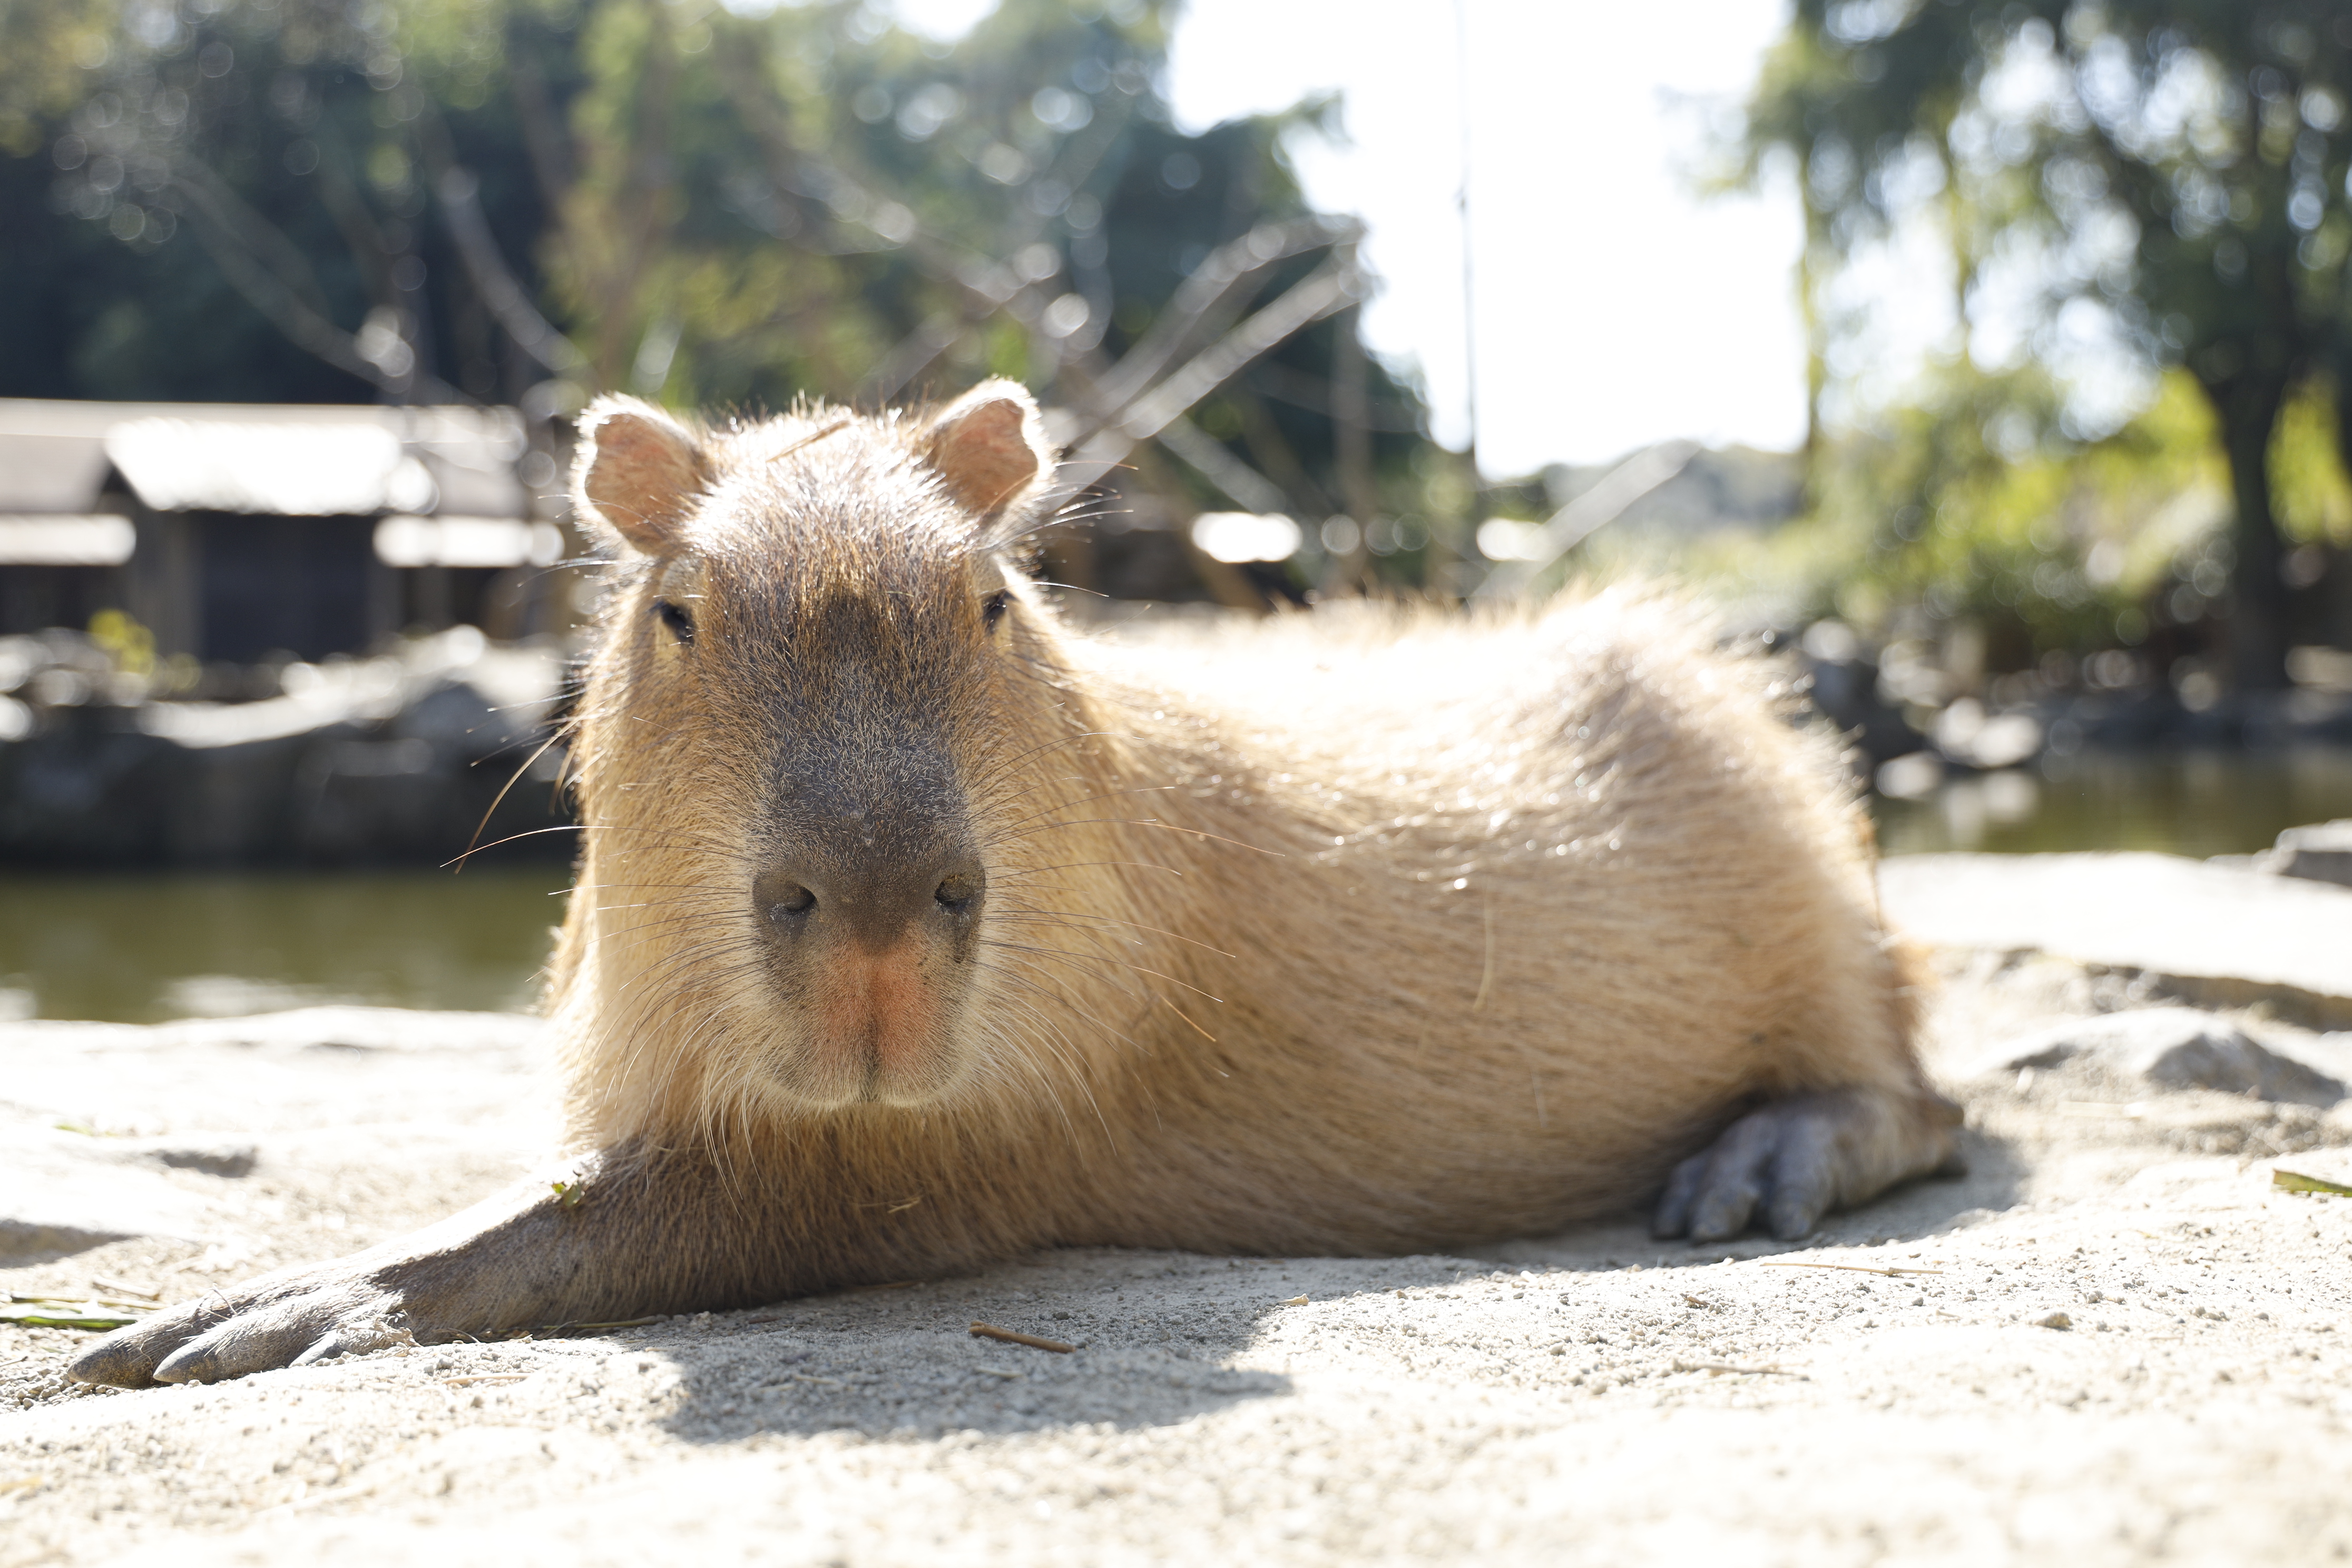 Why Is Everyone Suddenly Obsessed With This Giant Rodent?